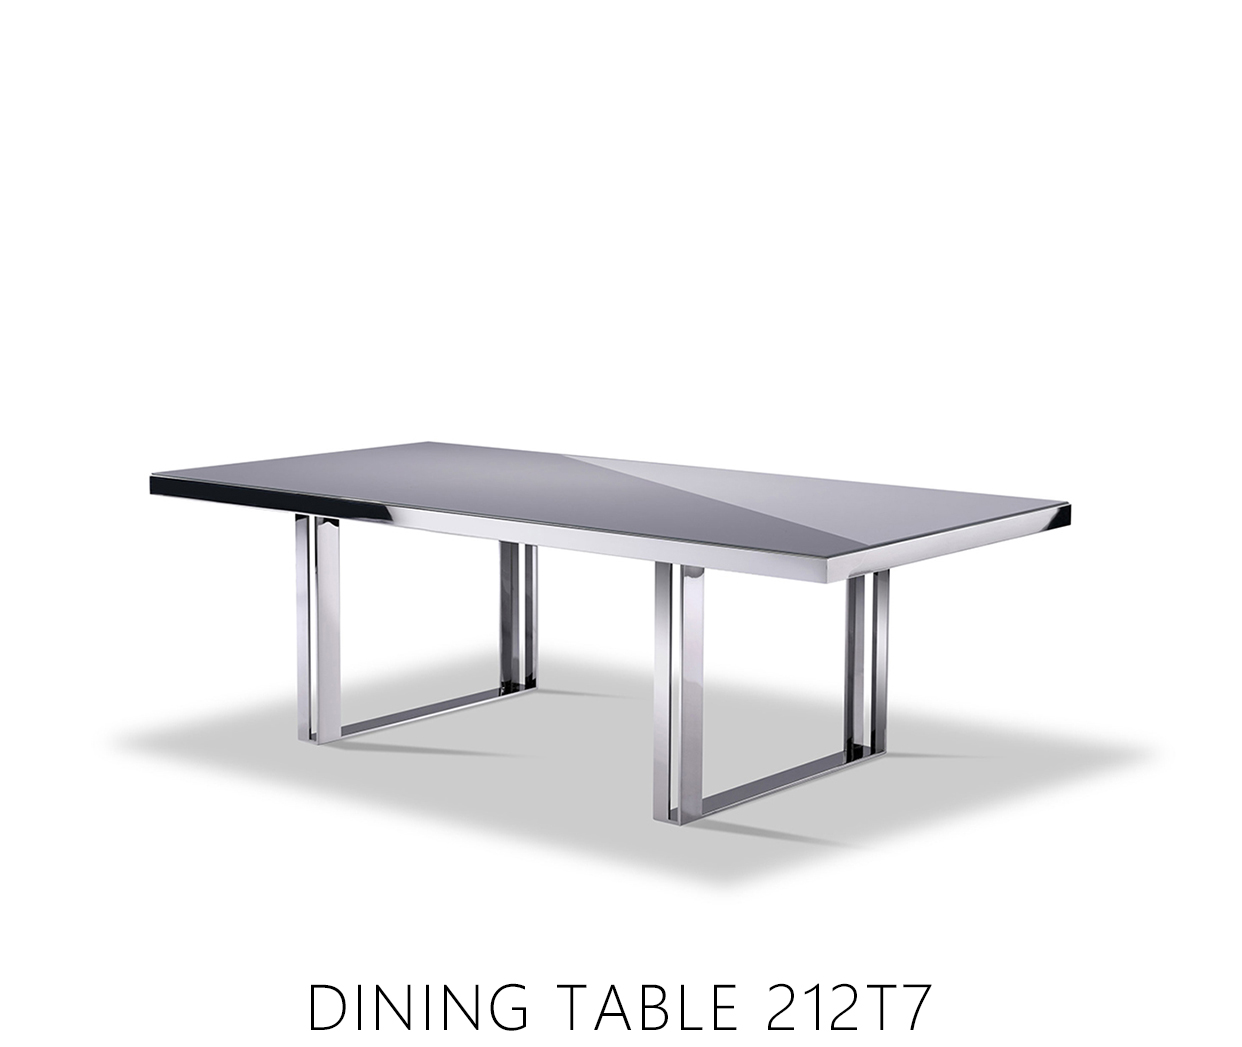 DINING TABLE 212T7